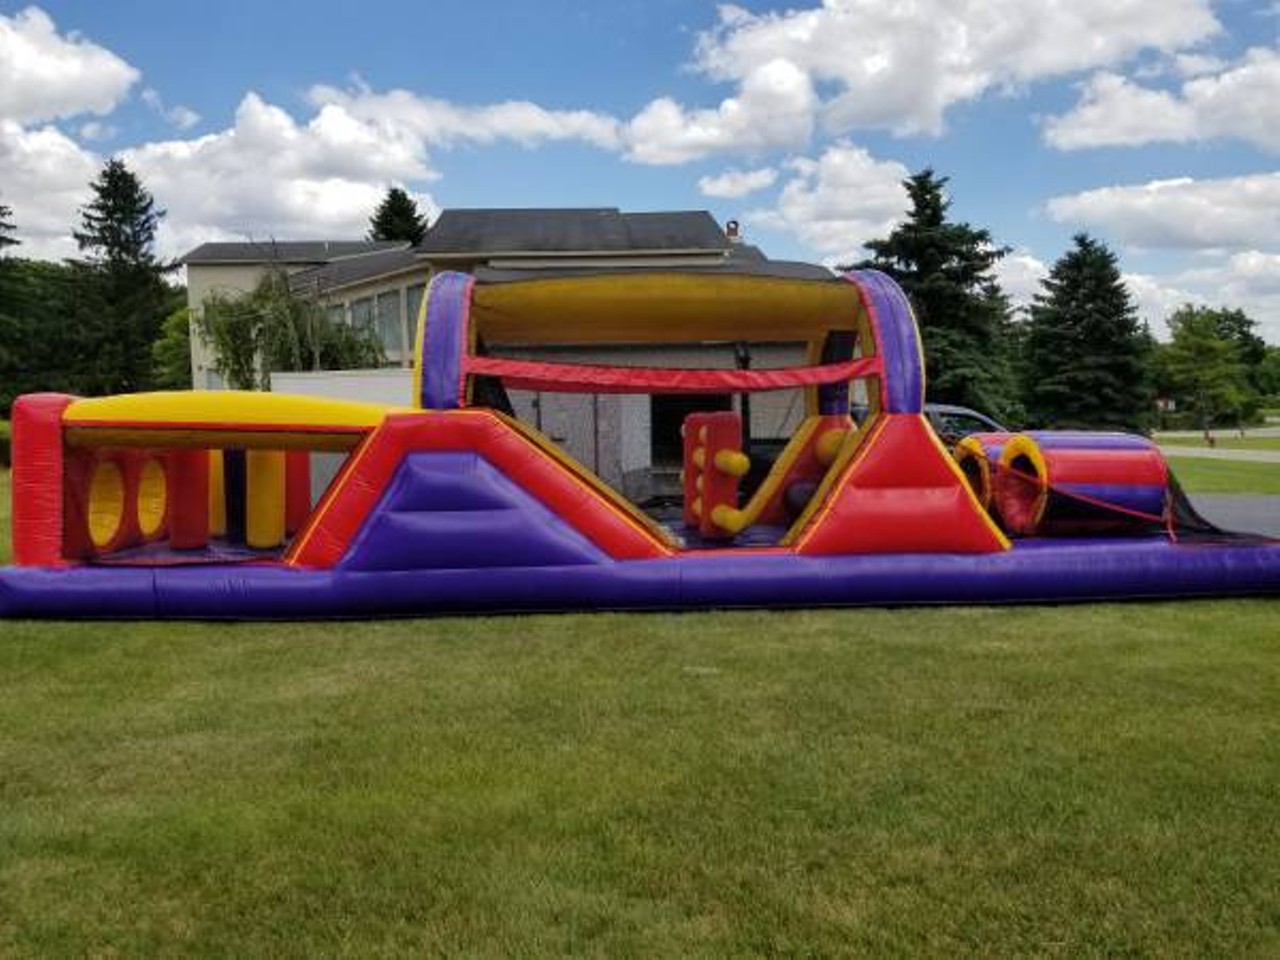 40' Obstacle Course inflatable by Ninja Jump ($3,000)
Milkshakes no longer bring boys to the yard. Inflatables do.
Photo via  Craigslist